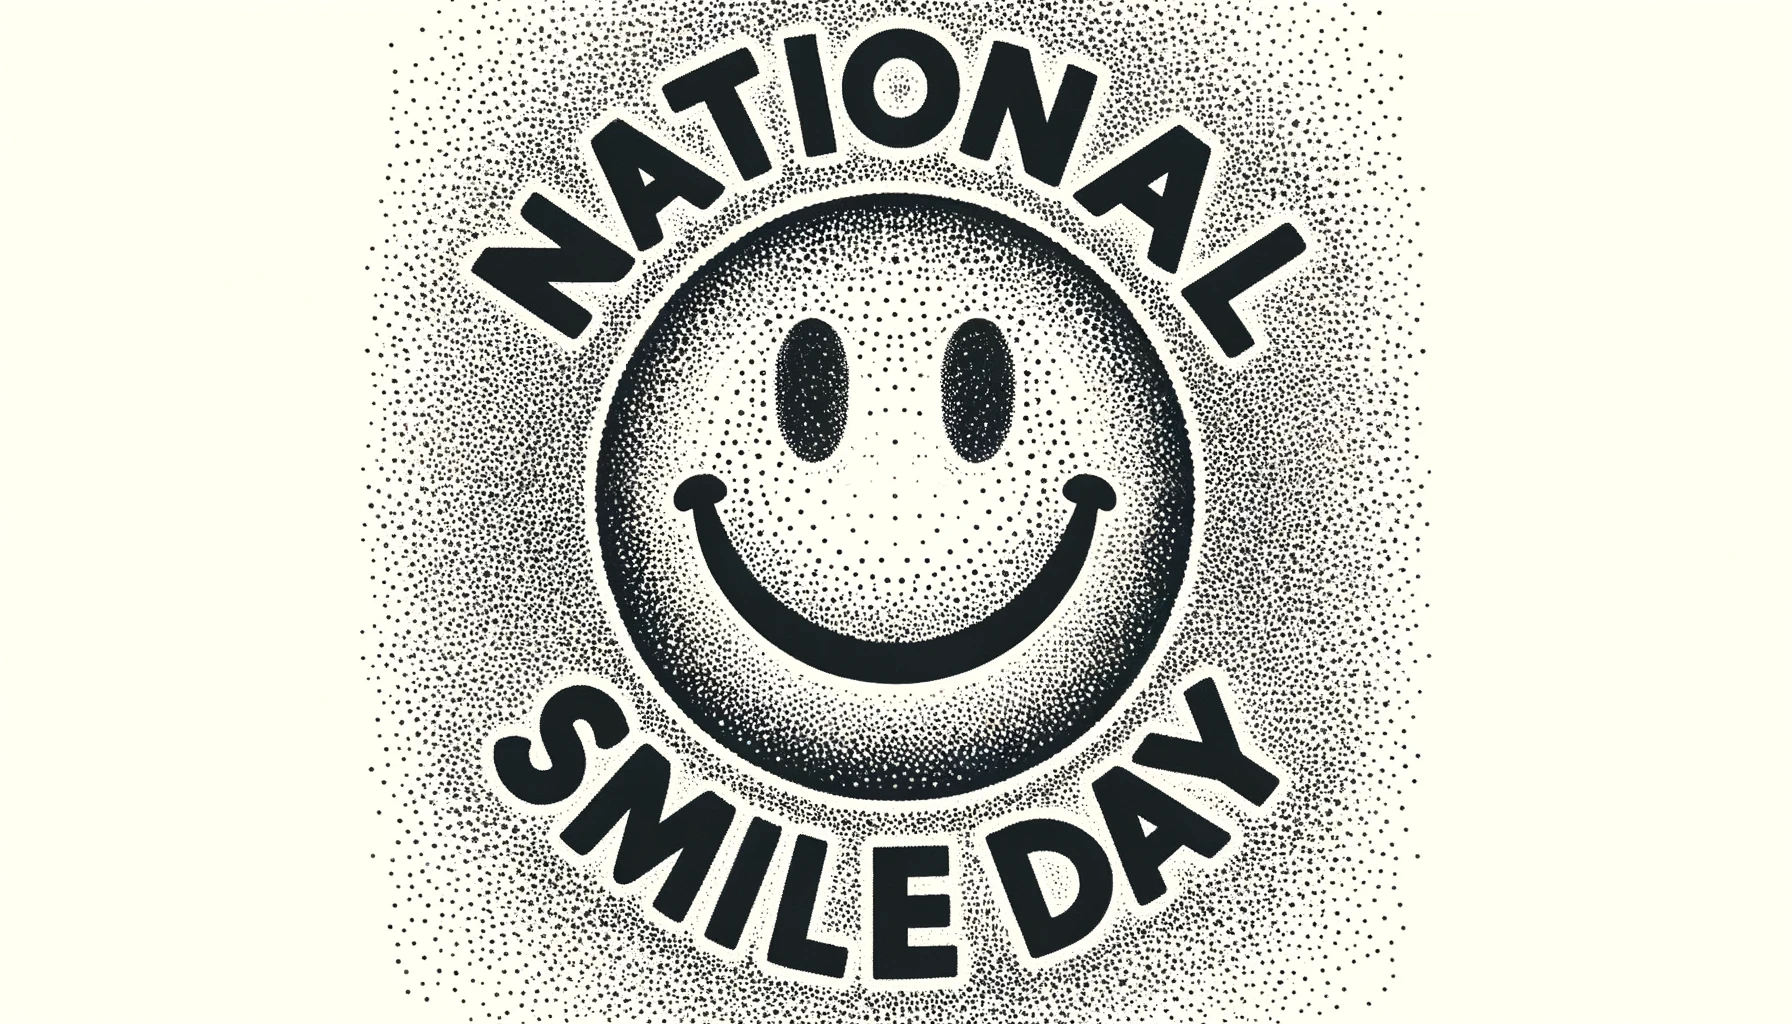 Warm Greetings for a Joyful National Smile Day